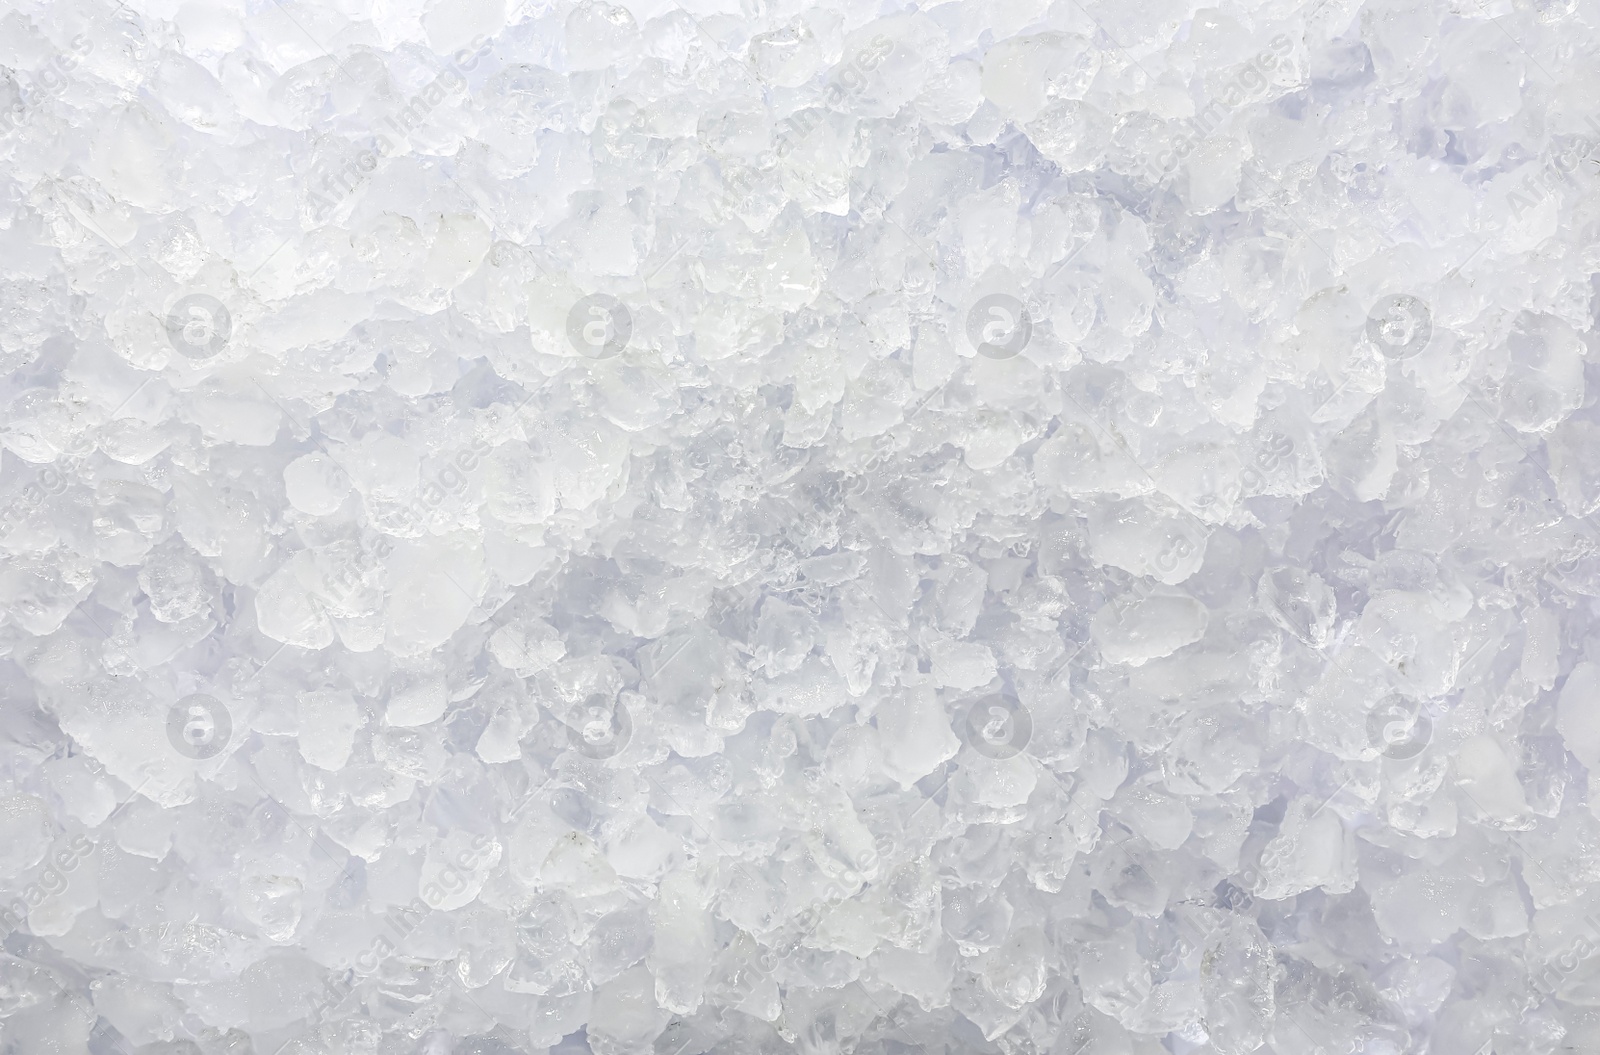 Photo of Clear crushed ice as background, top view